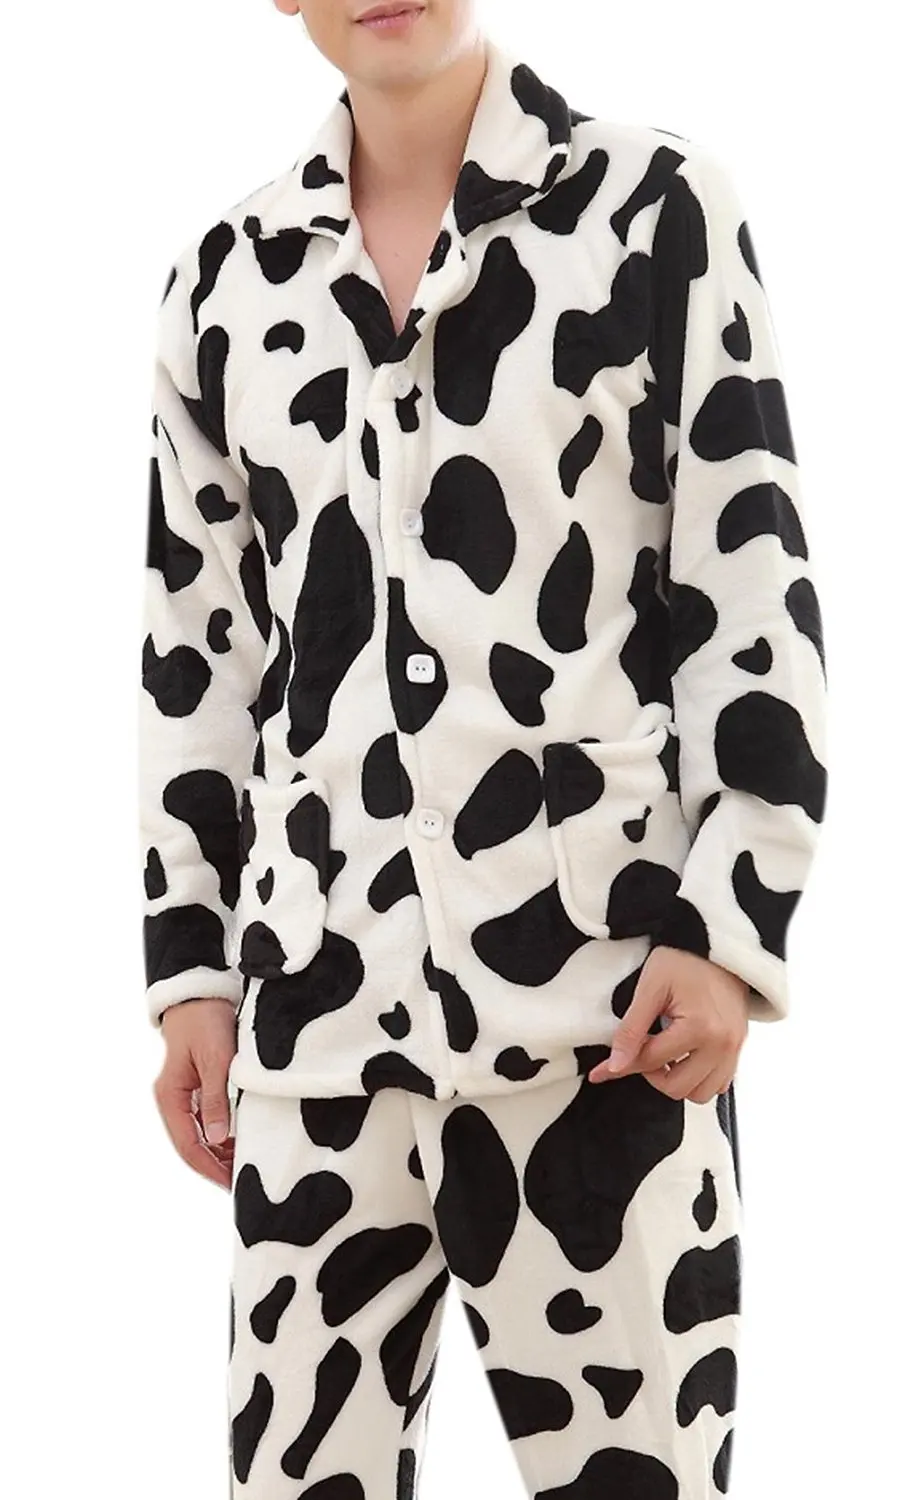 Cheap Cow Pajama, find Cow Pajama deals on line at Alibaba.com